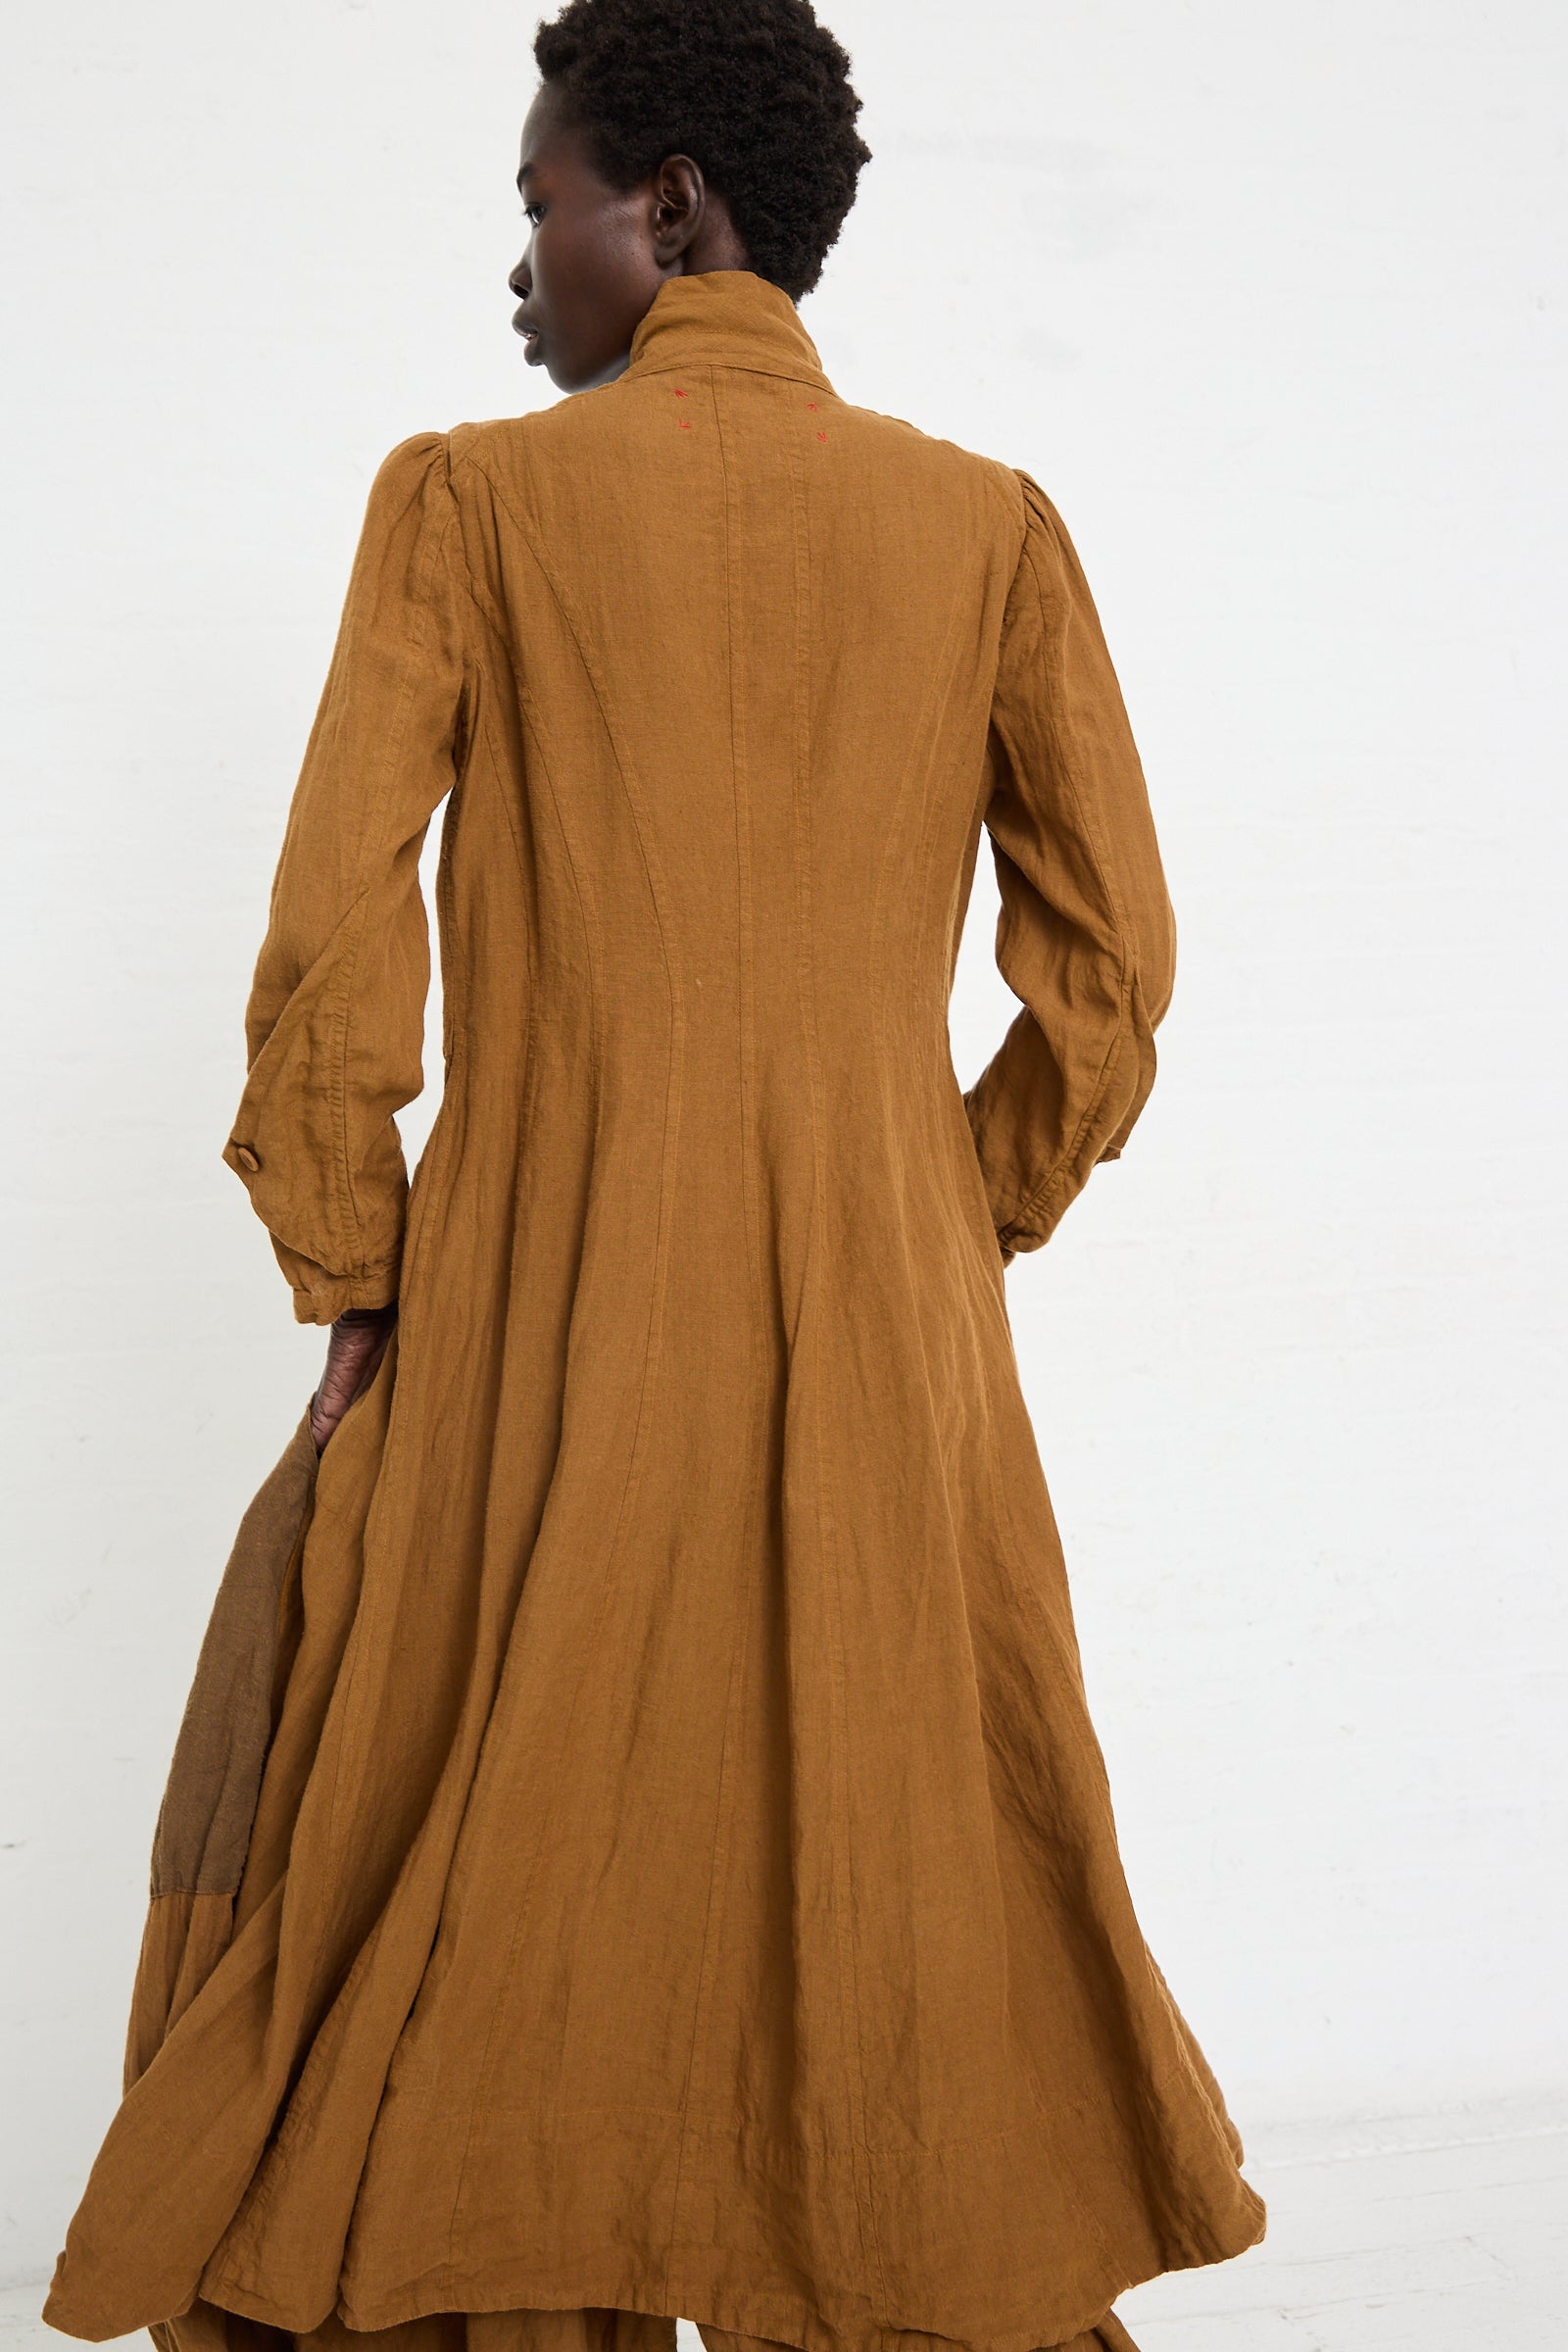 Person wearing a Hallelujah Linen Manteau de Pompier 1800's in Coffee with a high collar, made using a unique dyeing process in Kyoto, seen from the back, standing against a white background.